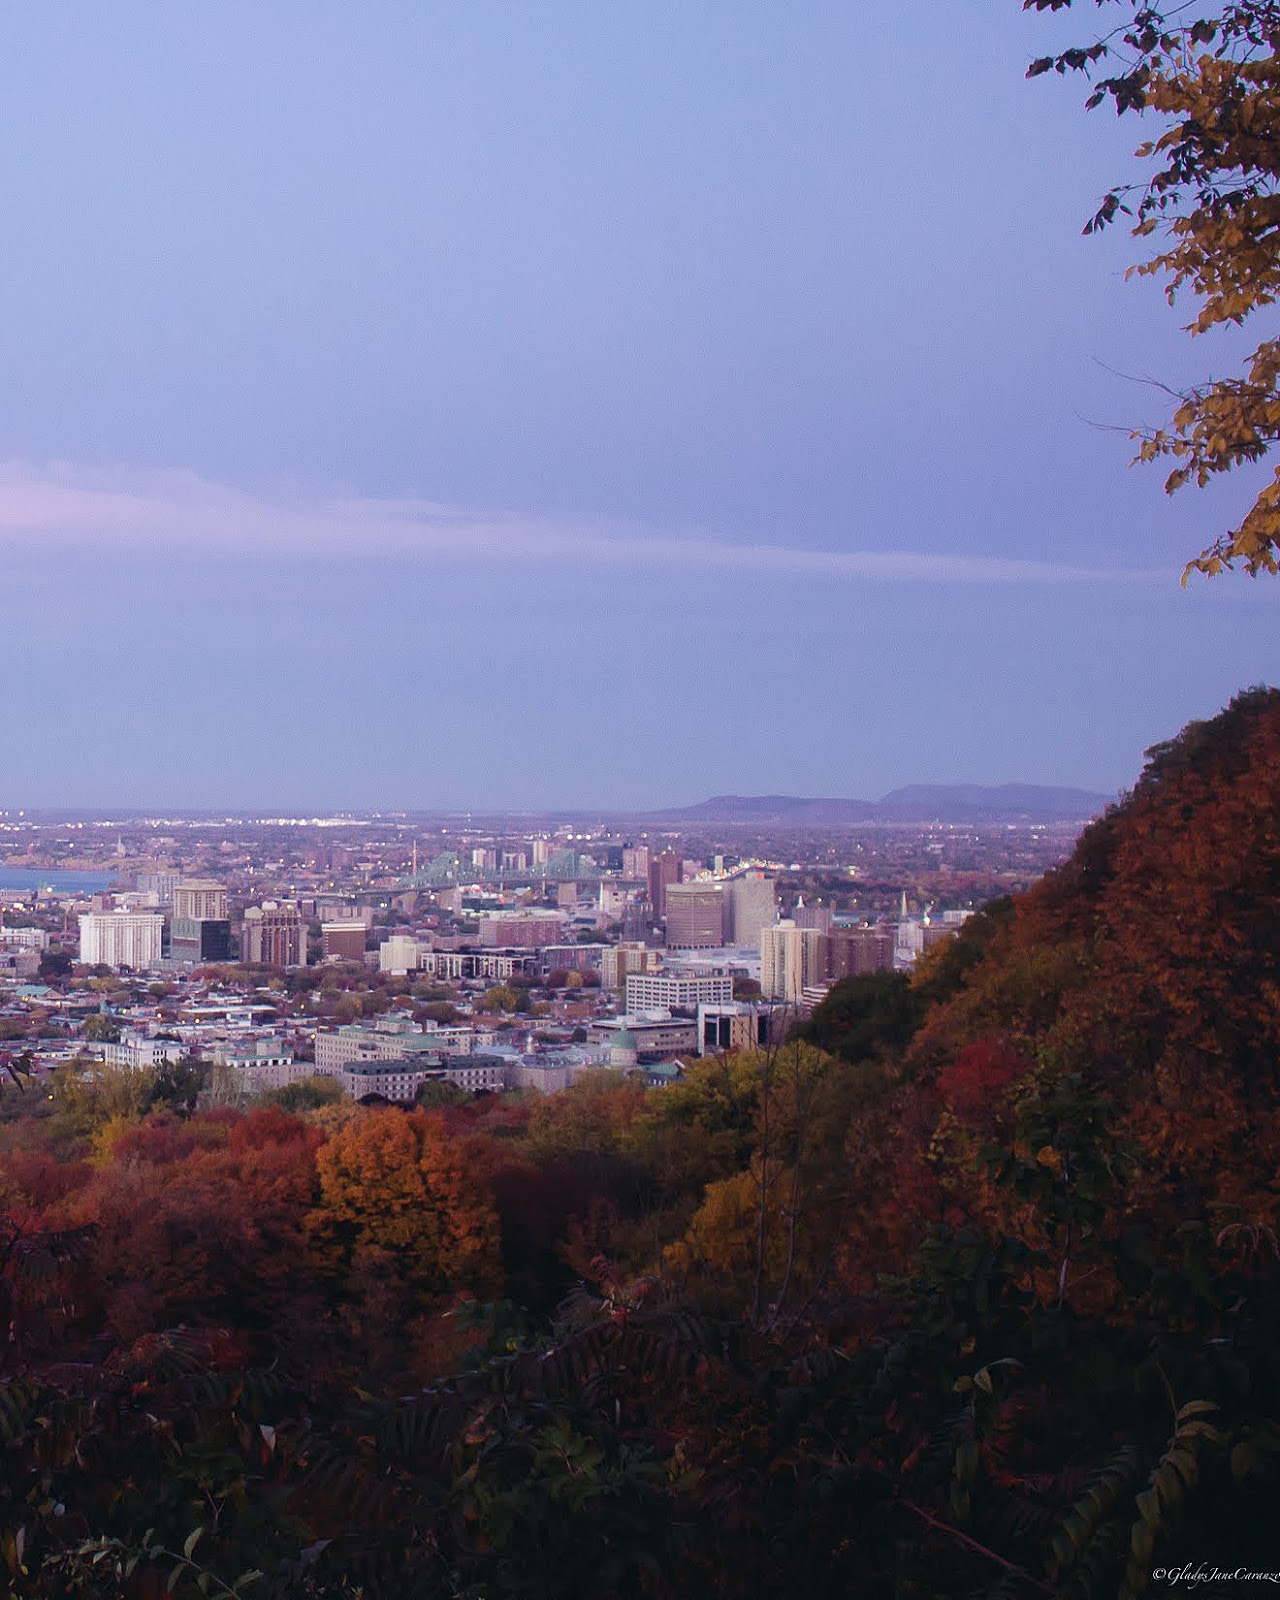 Mount Royal: Things To Do in Montreal, Quebec, Canada